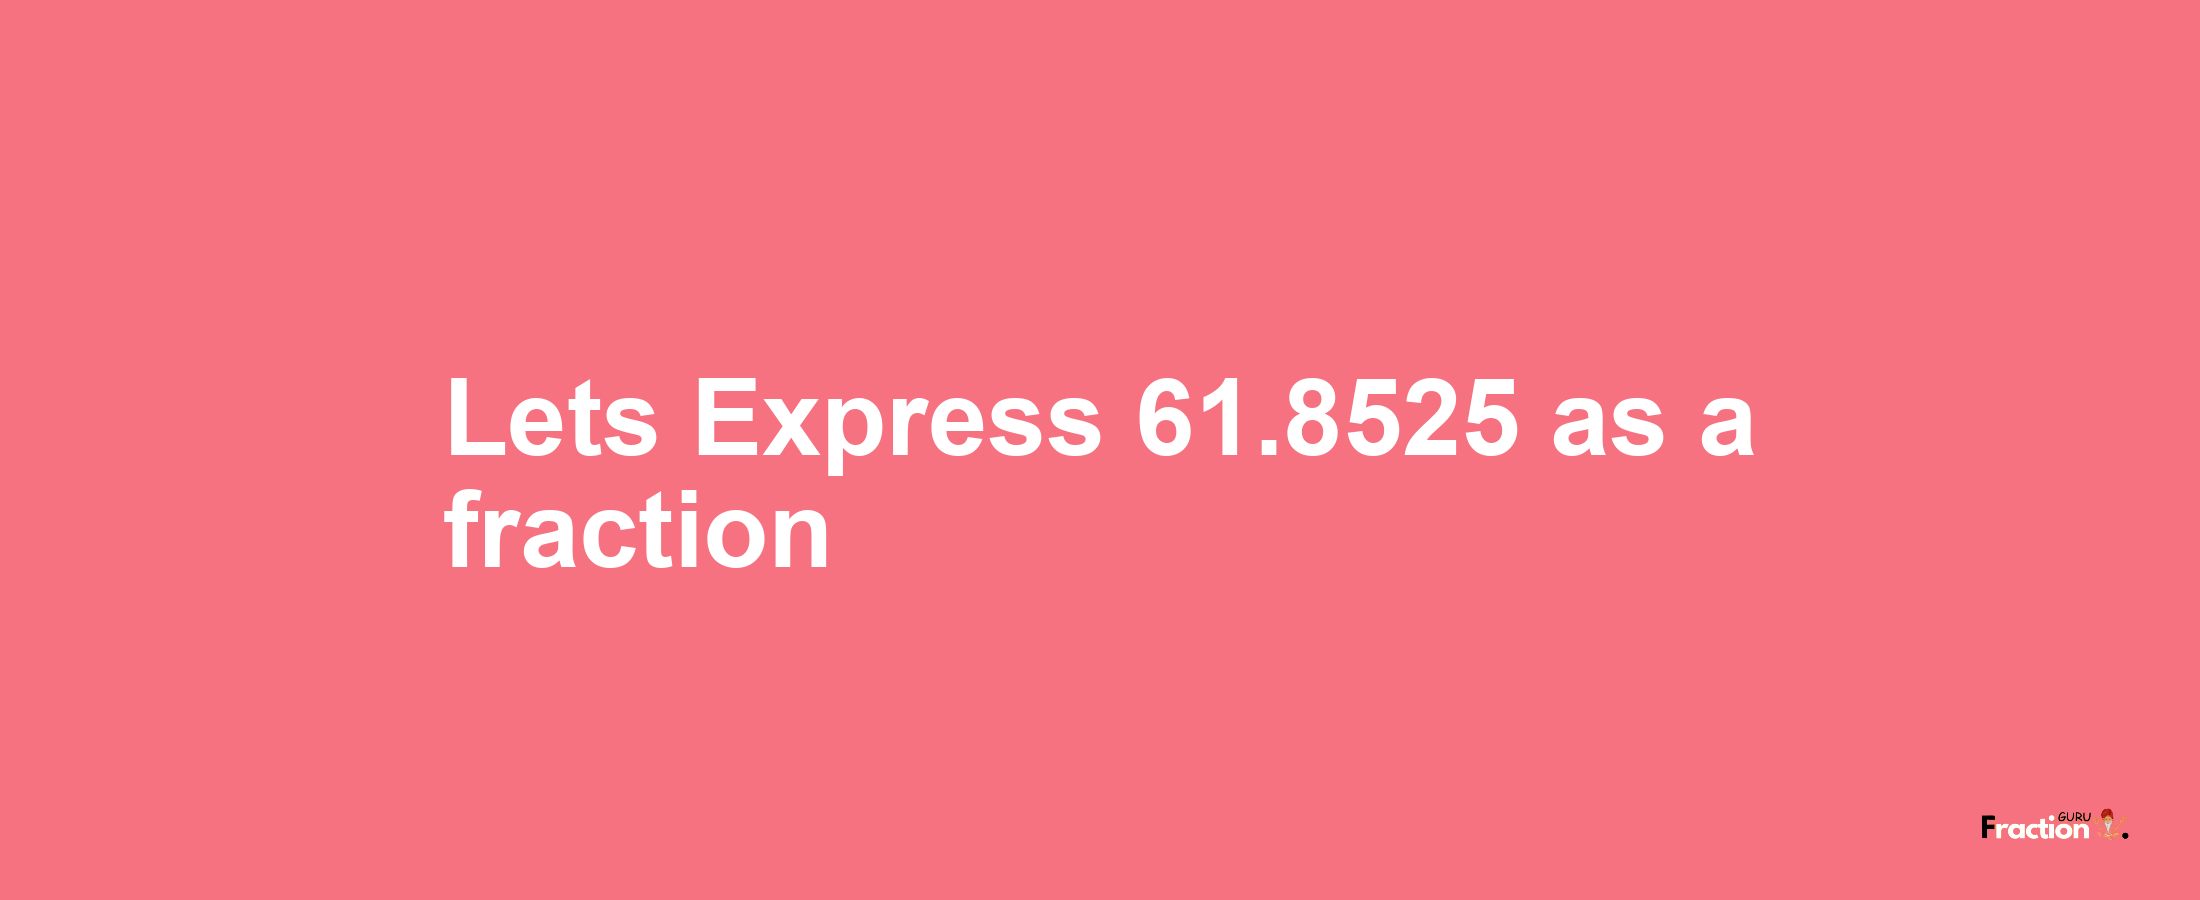 Lets Express 61.8525 as afraction